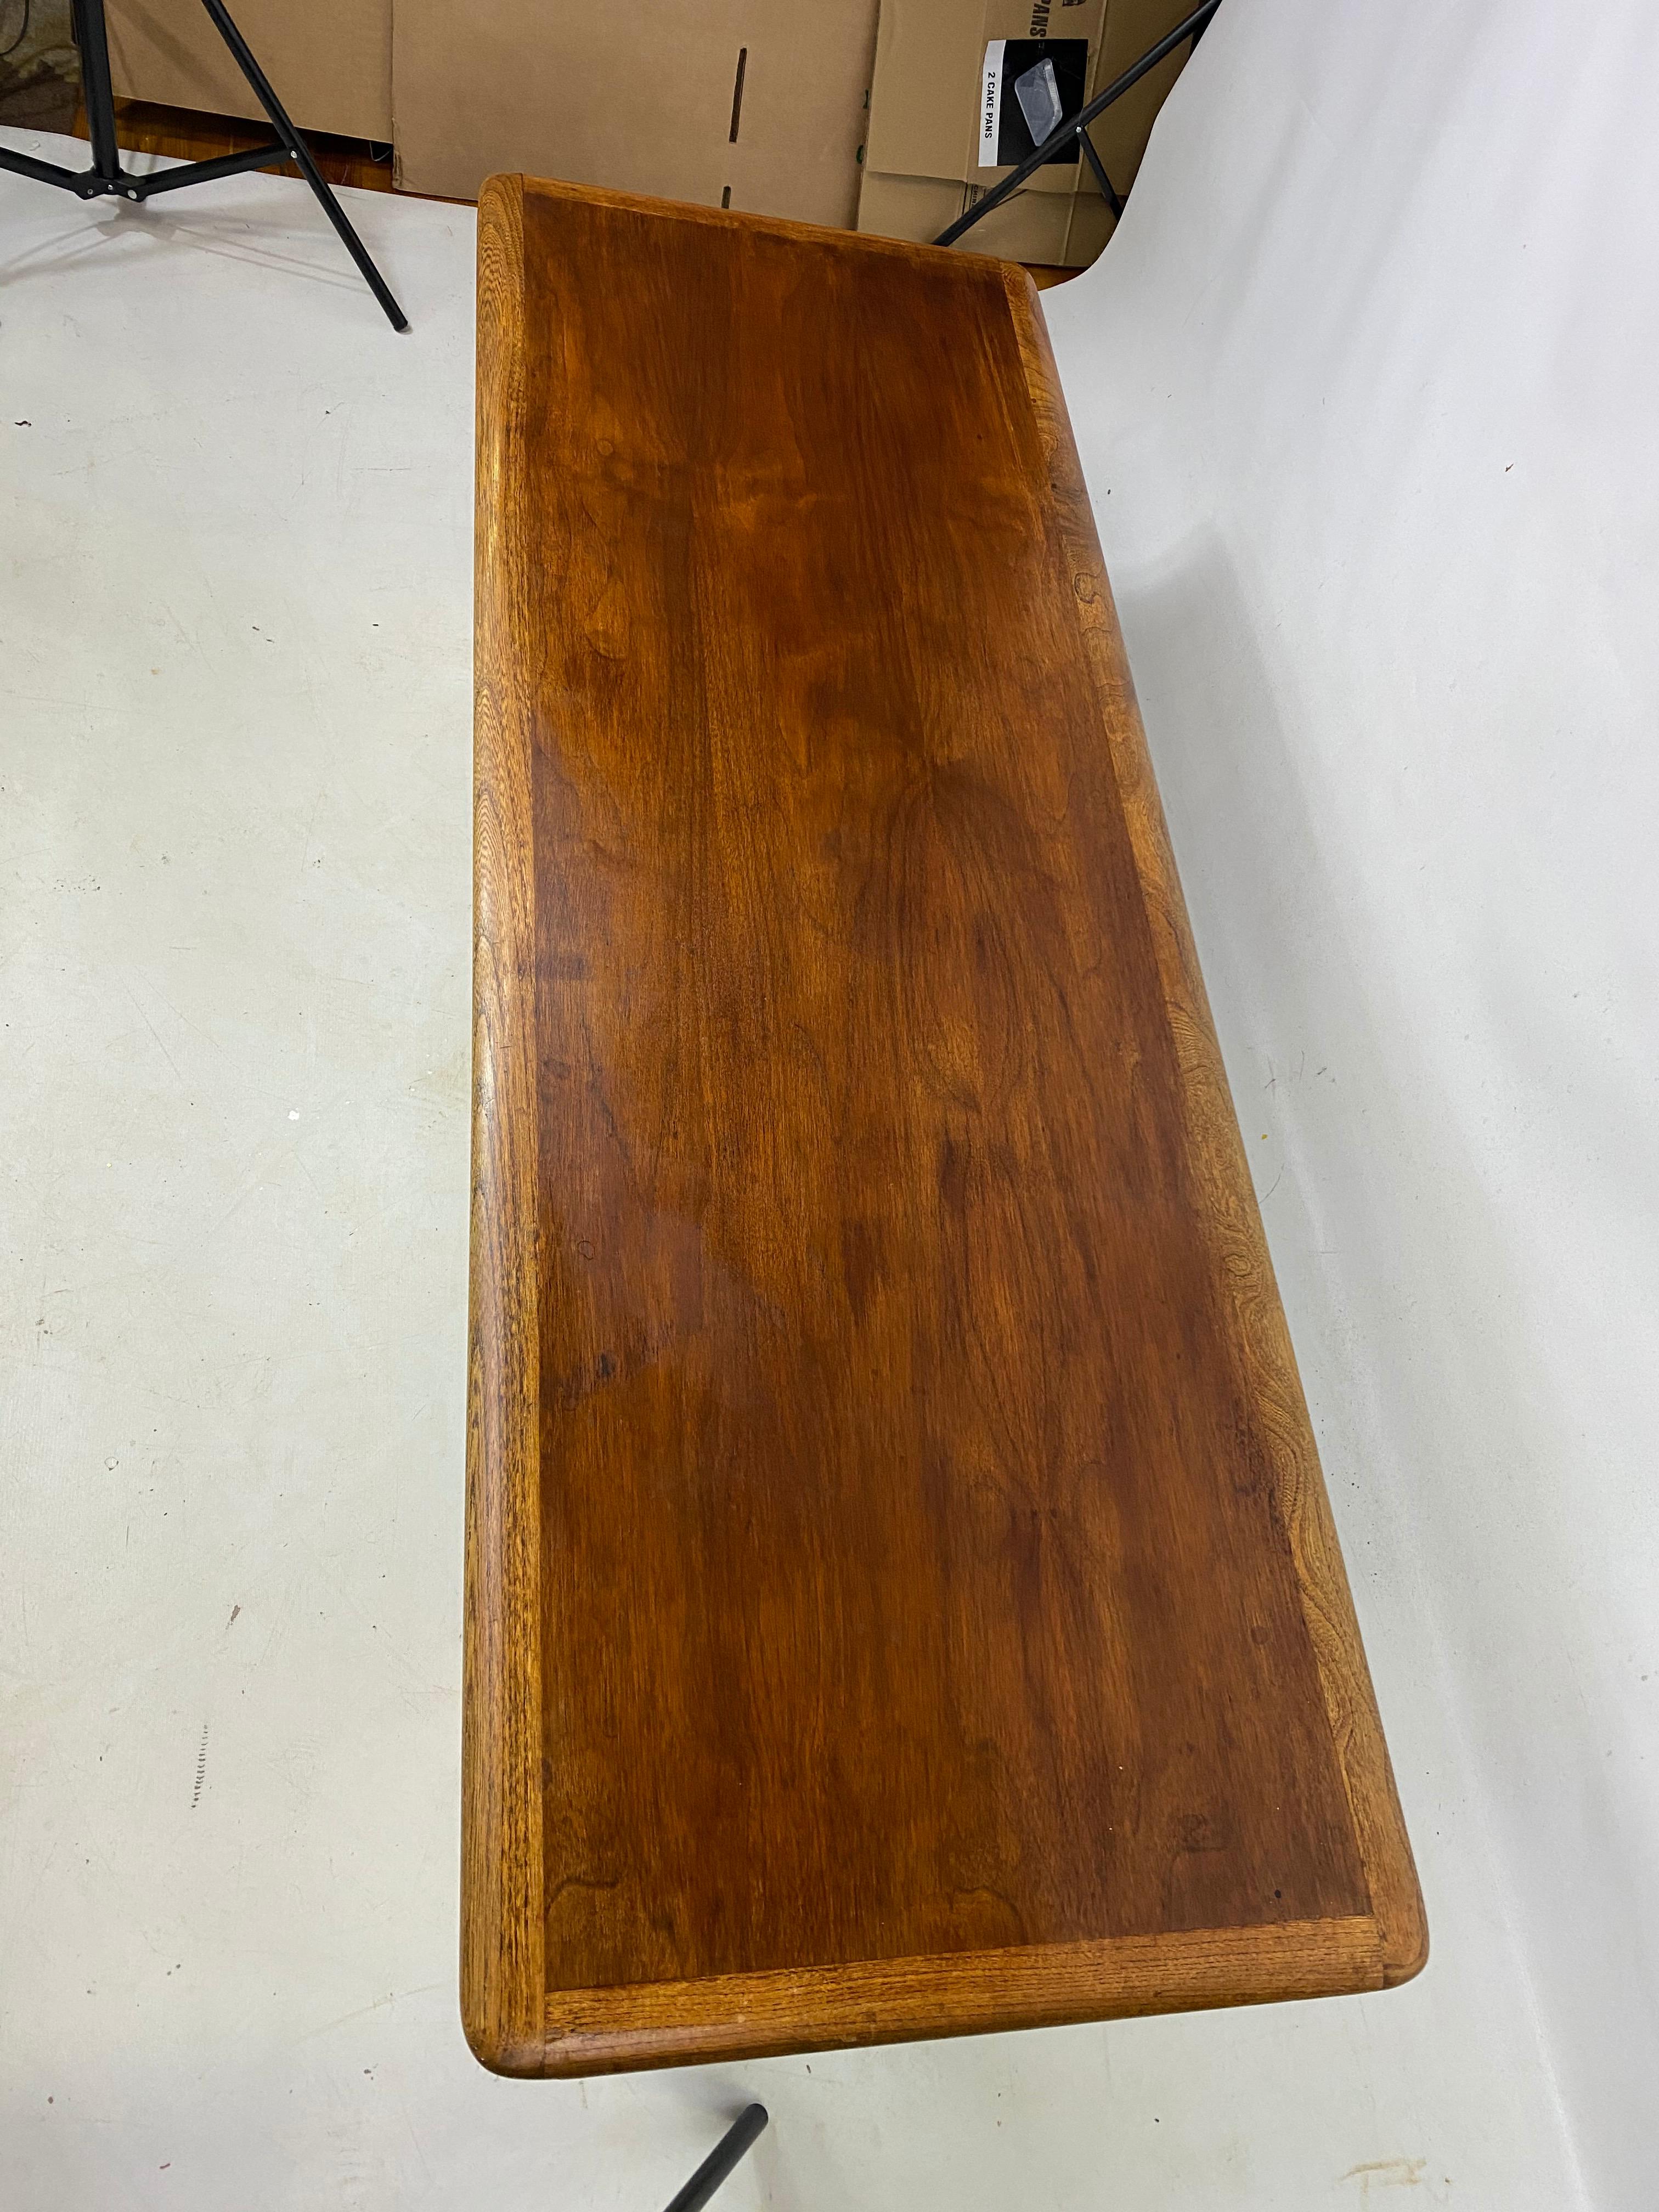 Warren church for Lane perception walnut coffee table. Table is very well made and has a great stylish design.